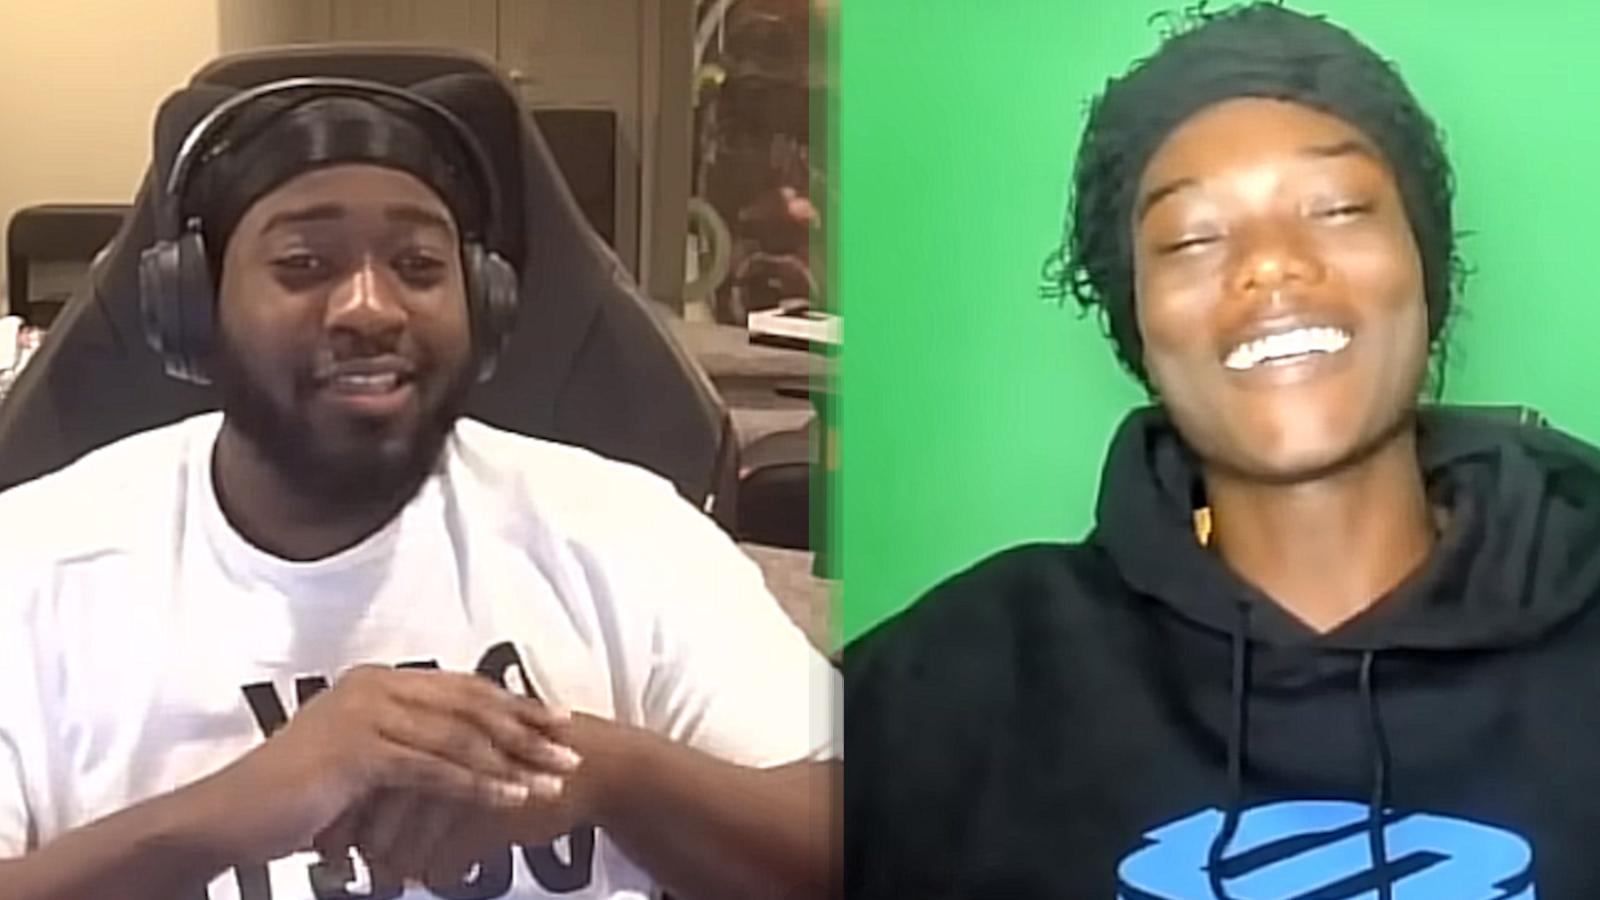 JiDion in his chair (left side), Mizzy sitting in front of a green screen (right side).